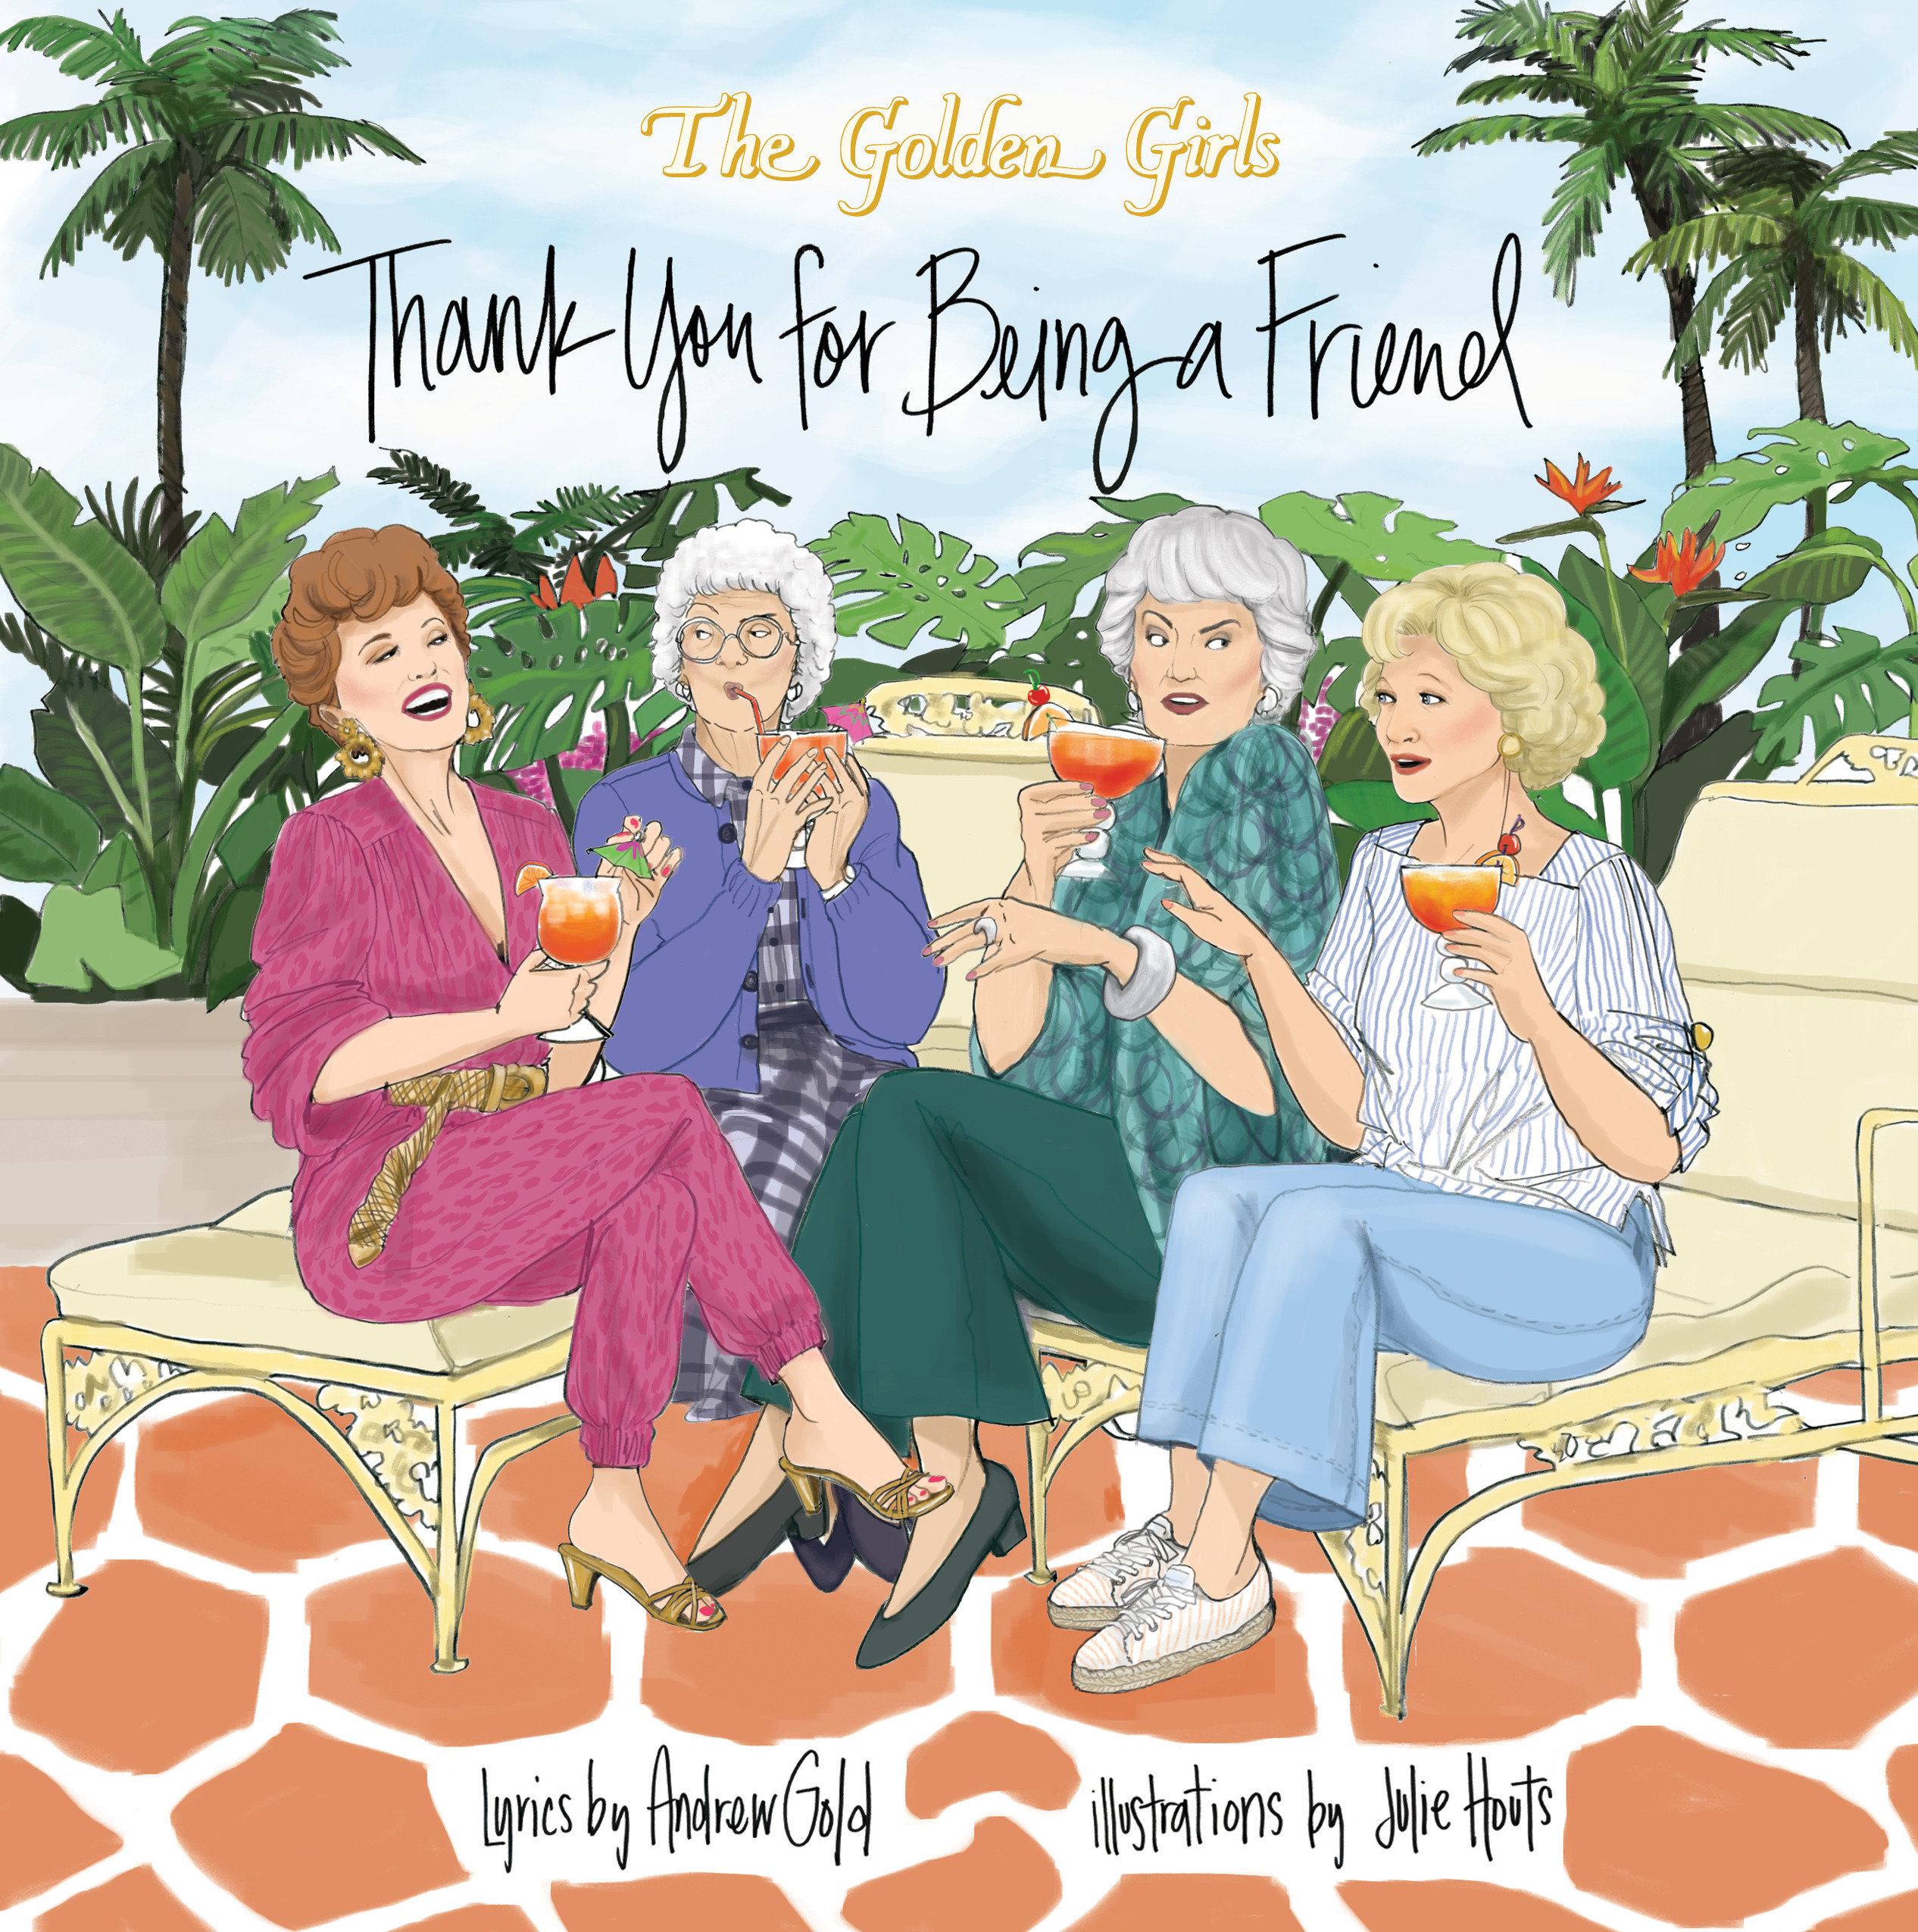 Golden Girls: Thank You for Being A Friend (Hardcover Book)